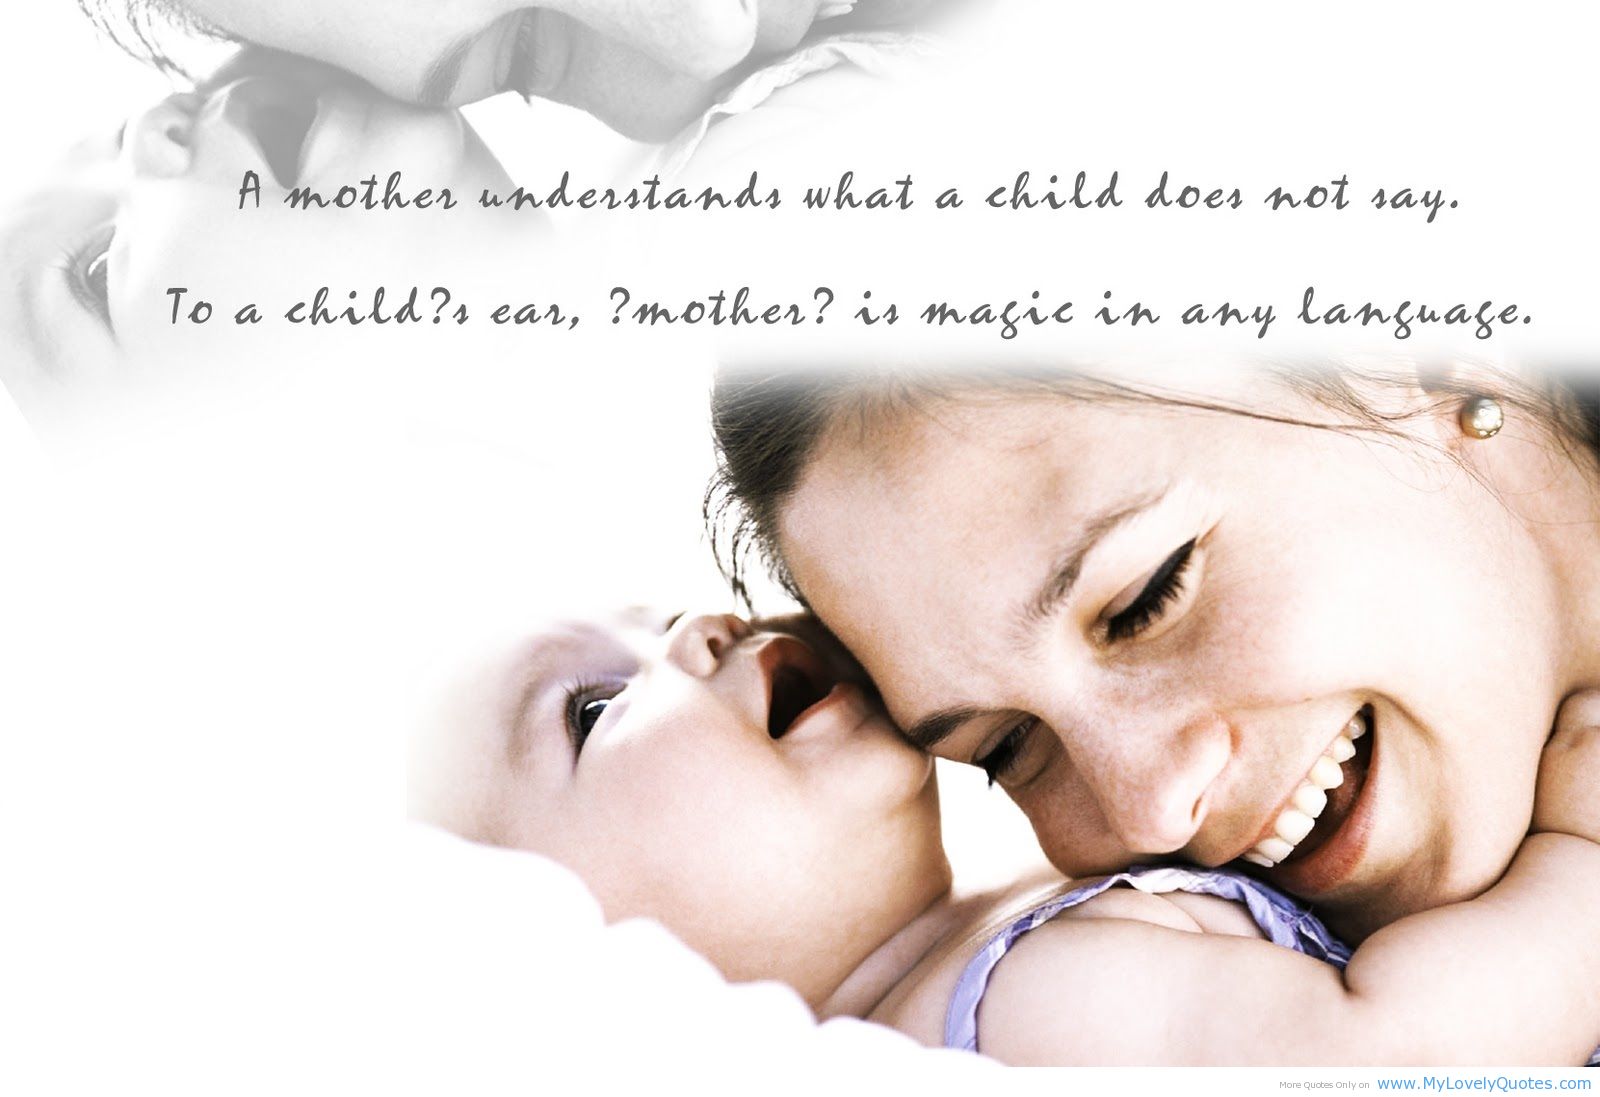 Quotes About Mothers And Sons. QuotesGram